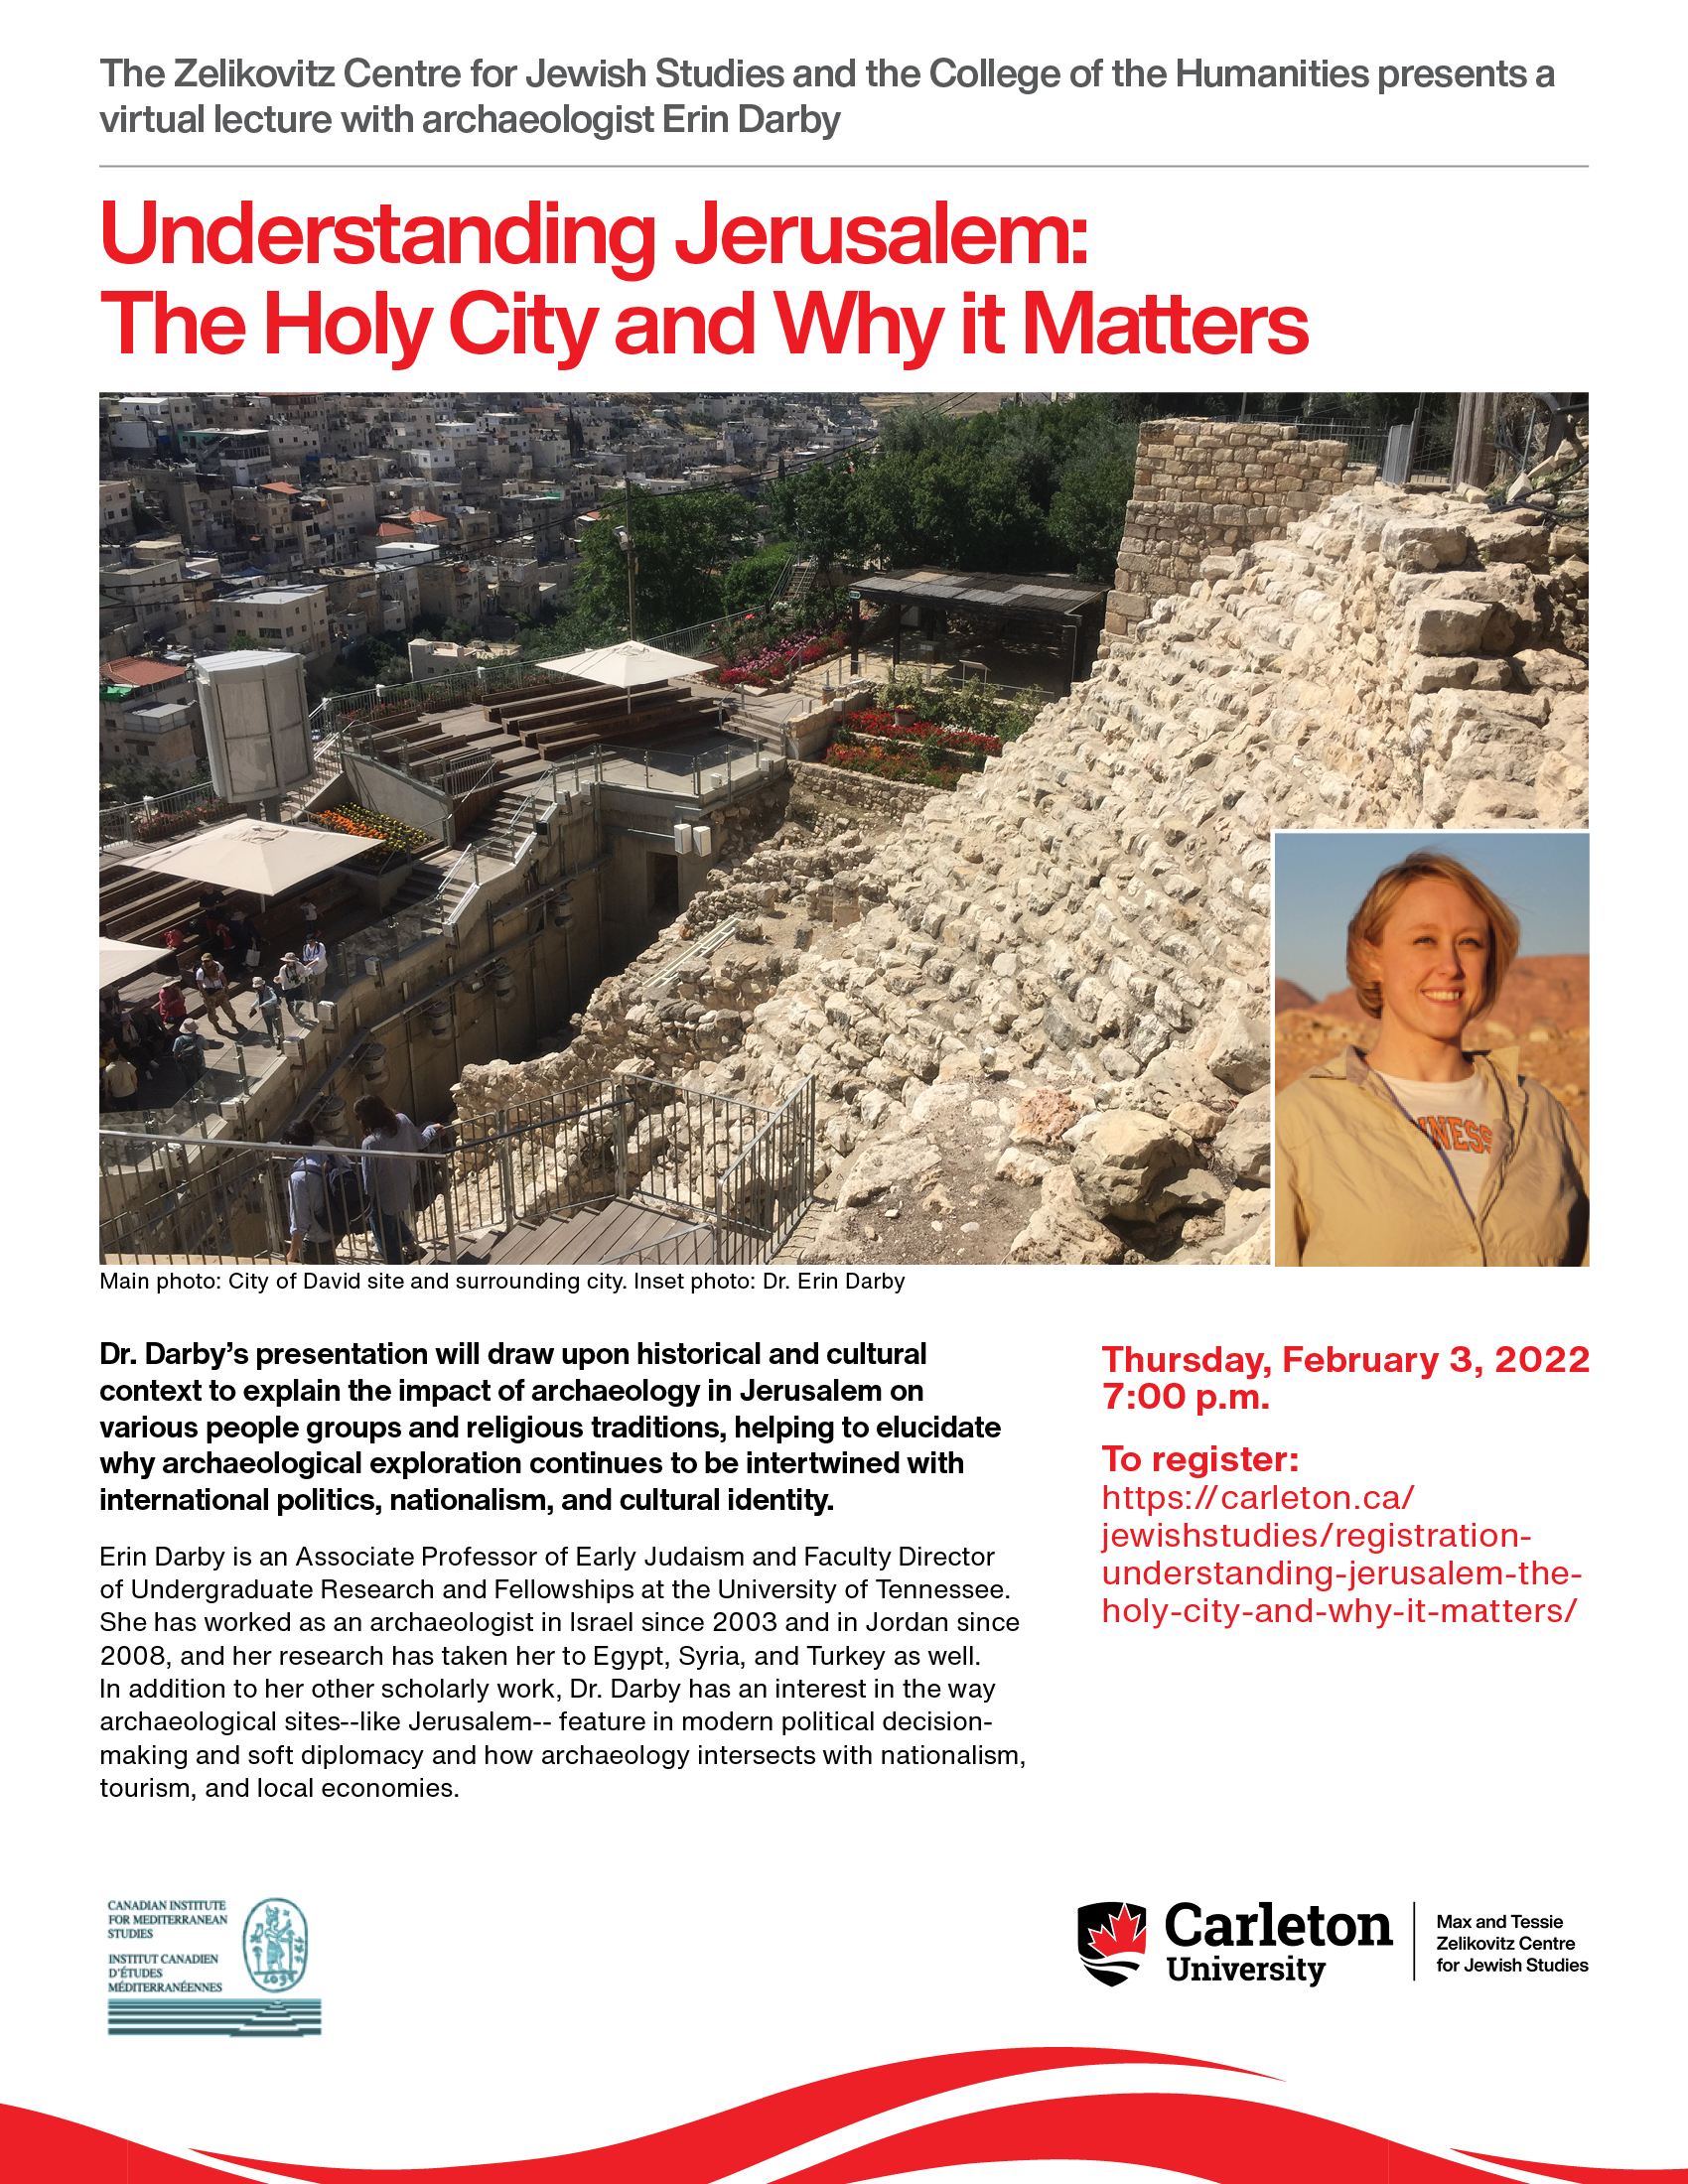 Poster for Erin Darby virtual lecture on February 3, 2022